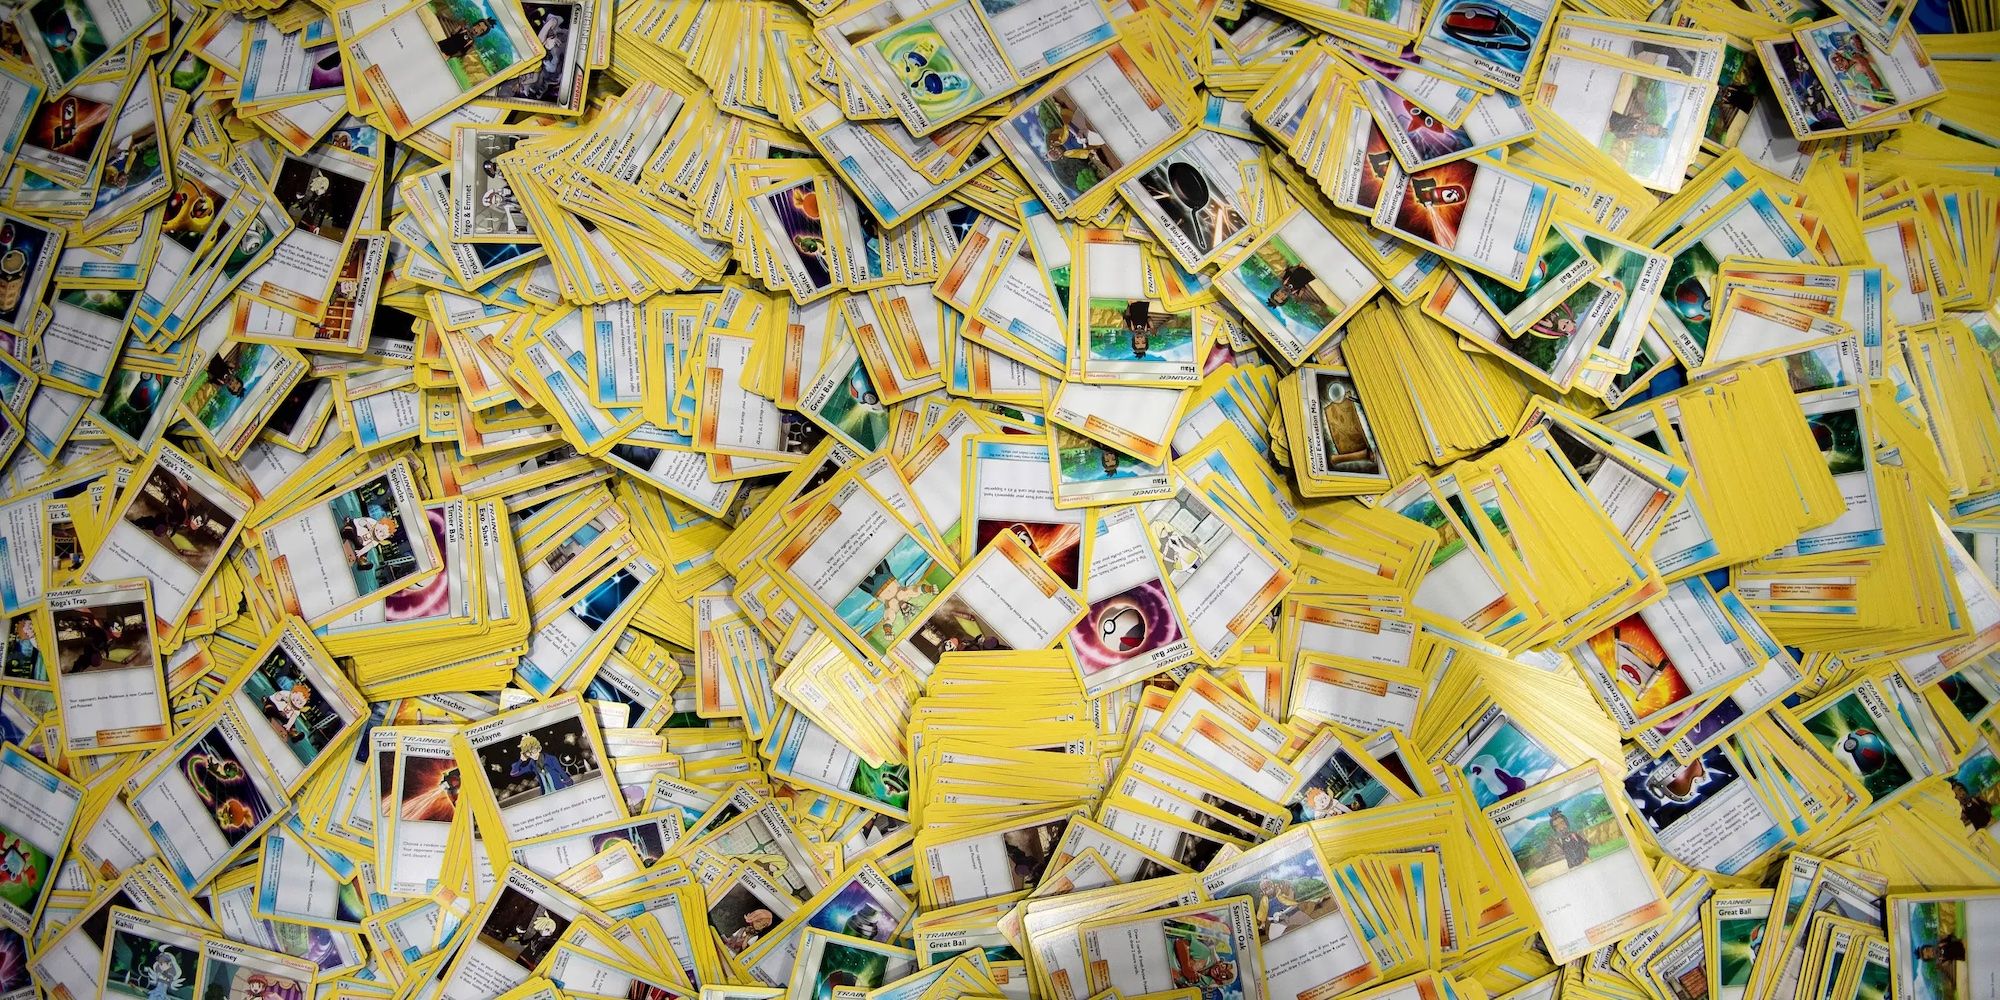 Pokémon cards are in high demand